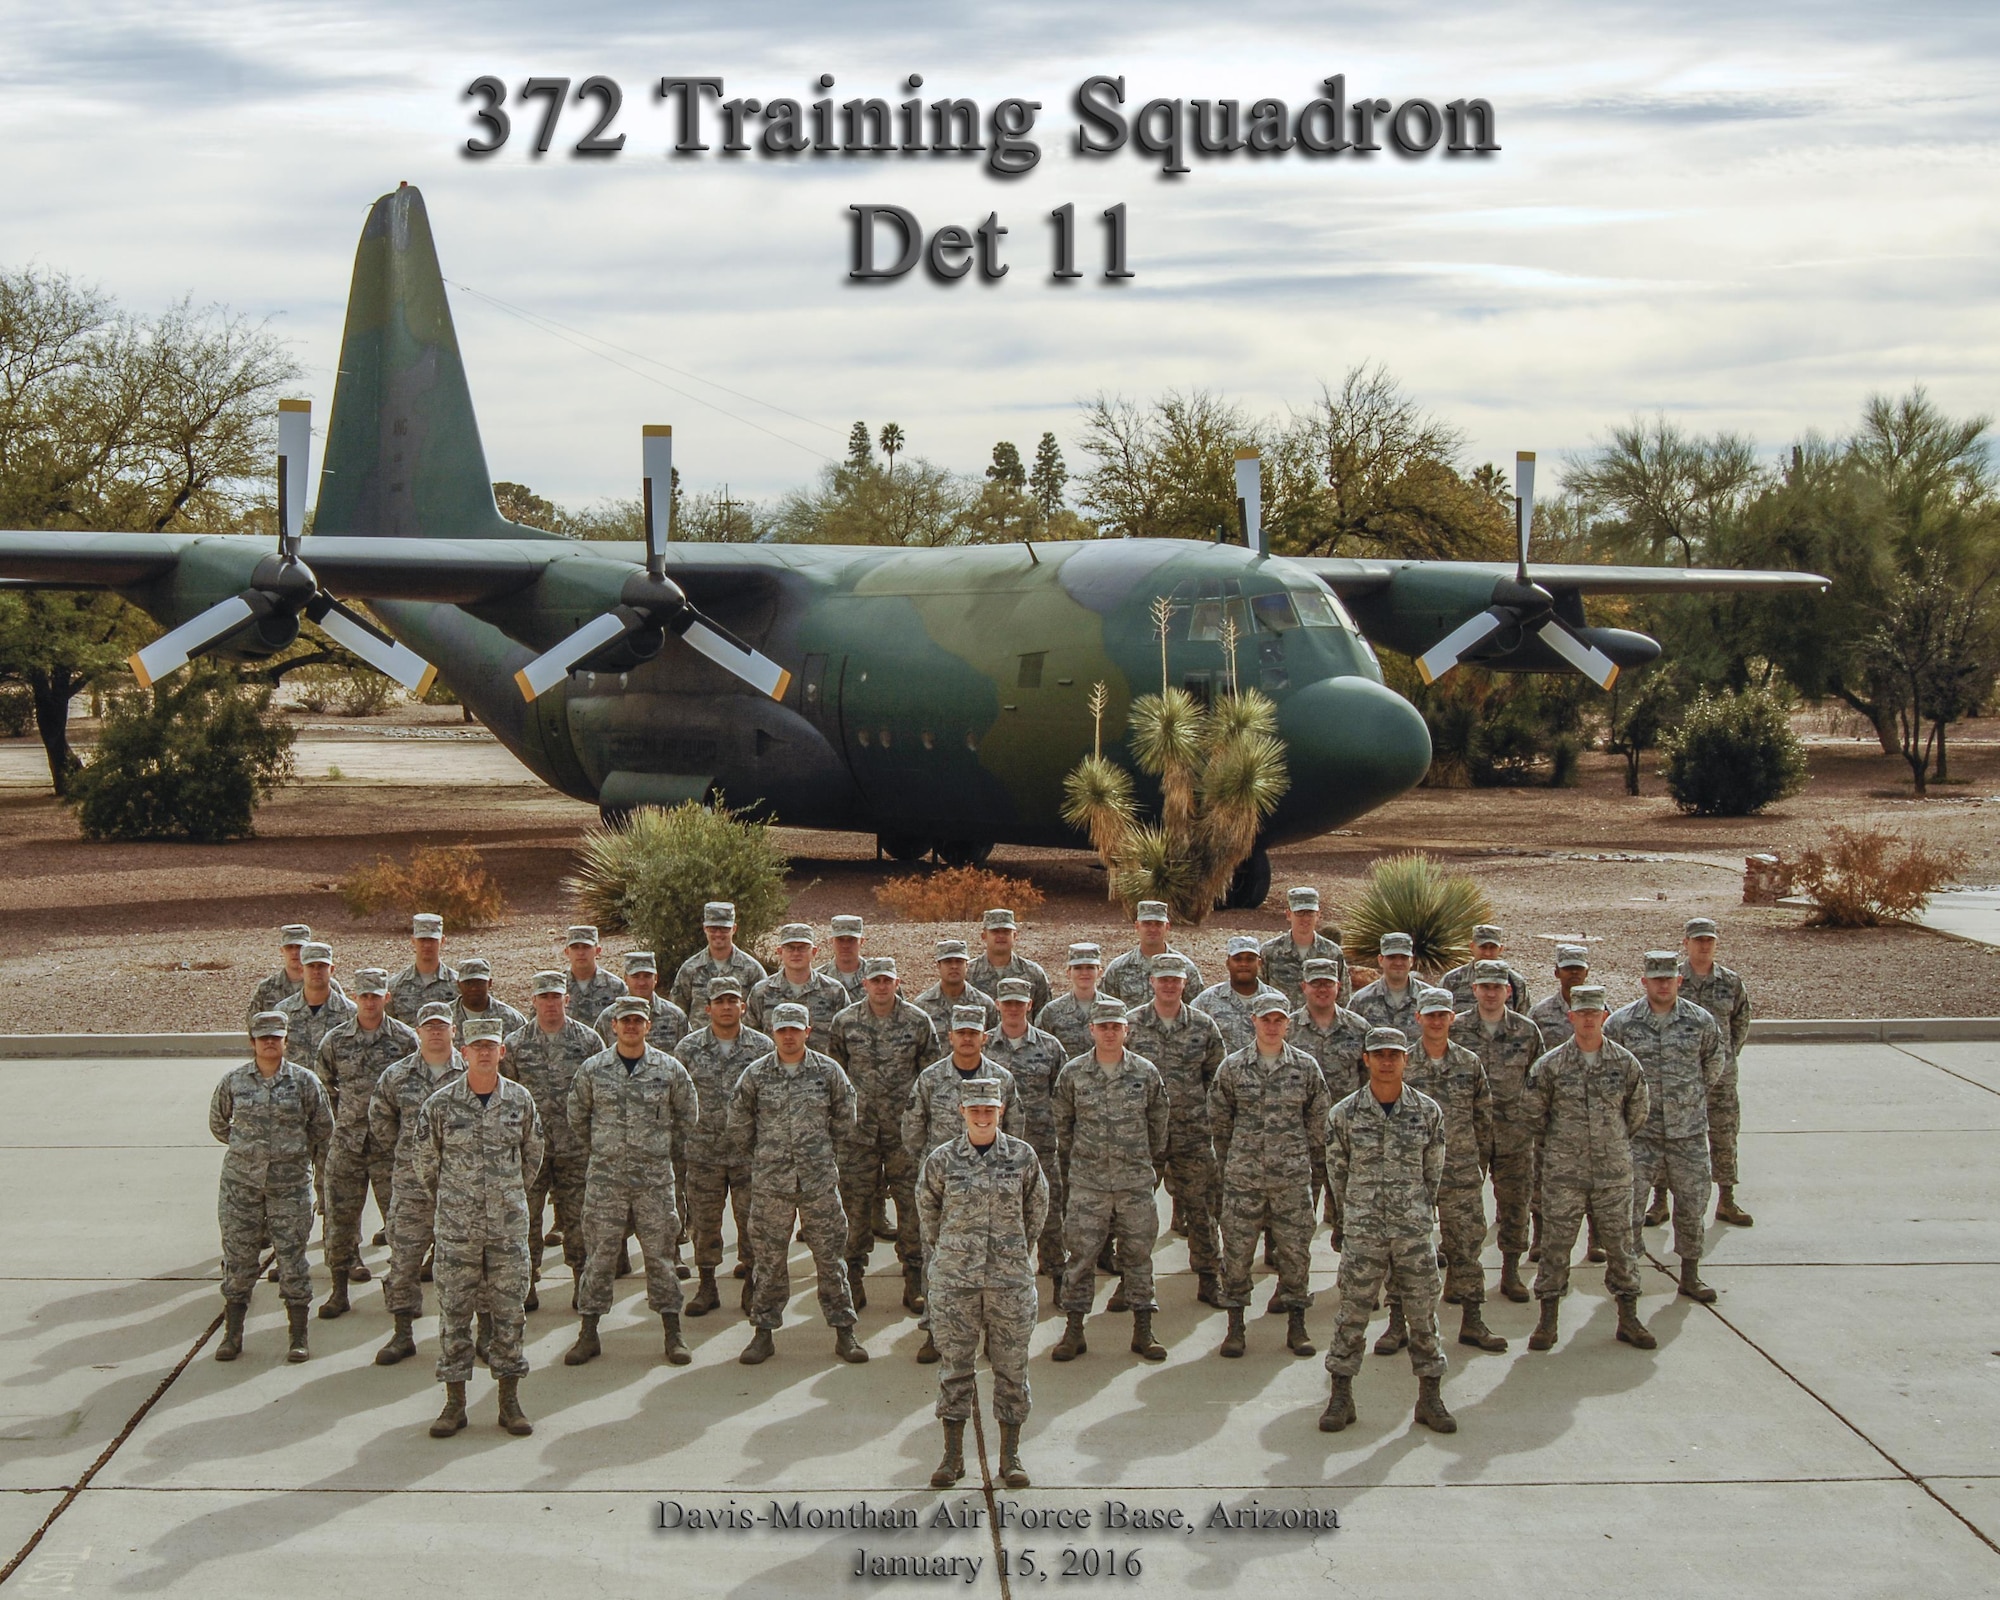 Detachment 11 is located in the southern part of Arizona in the city of Tucson.